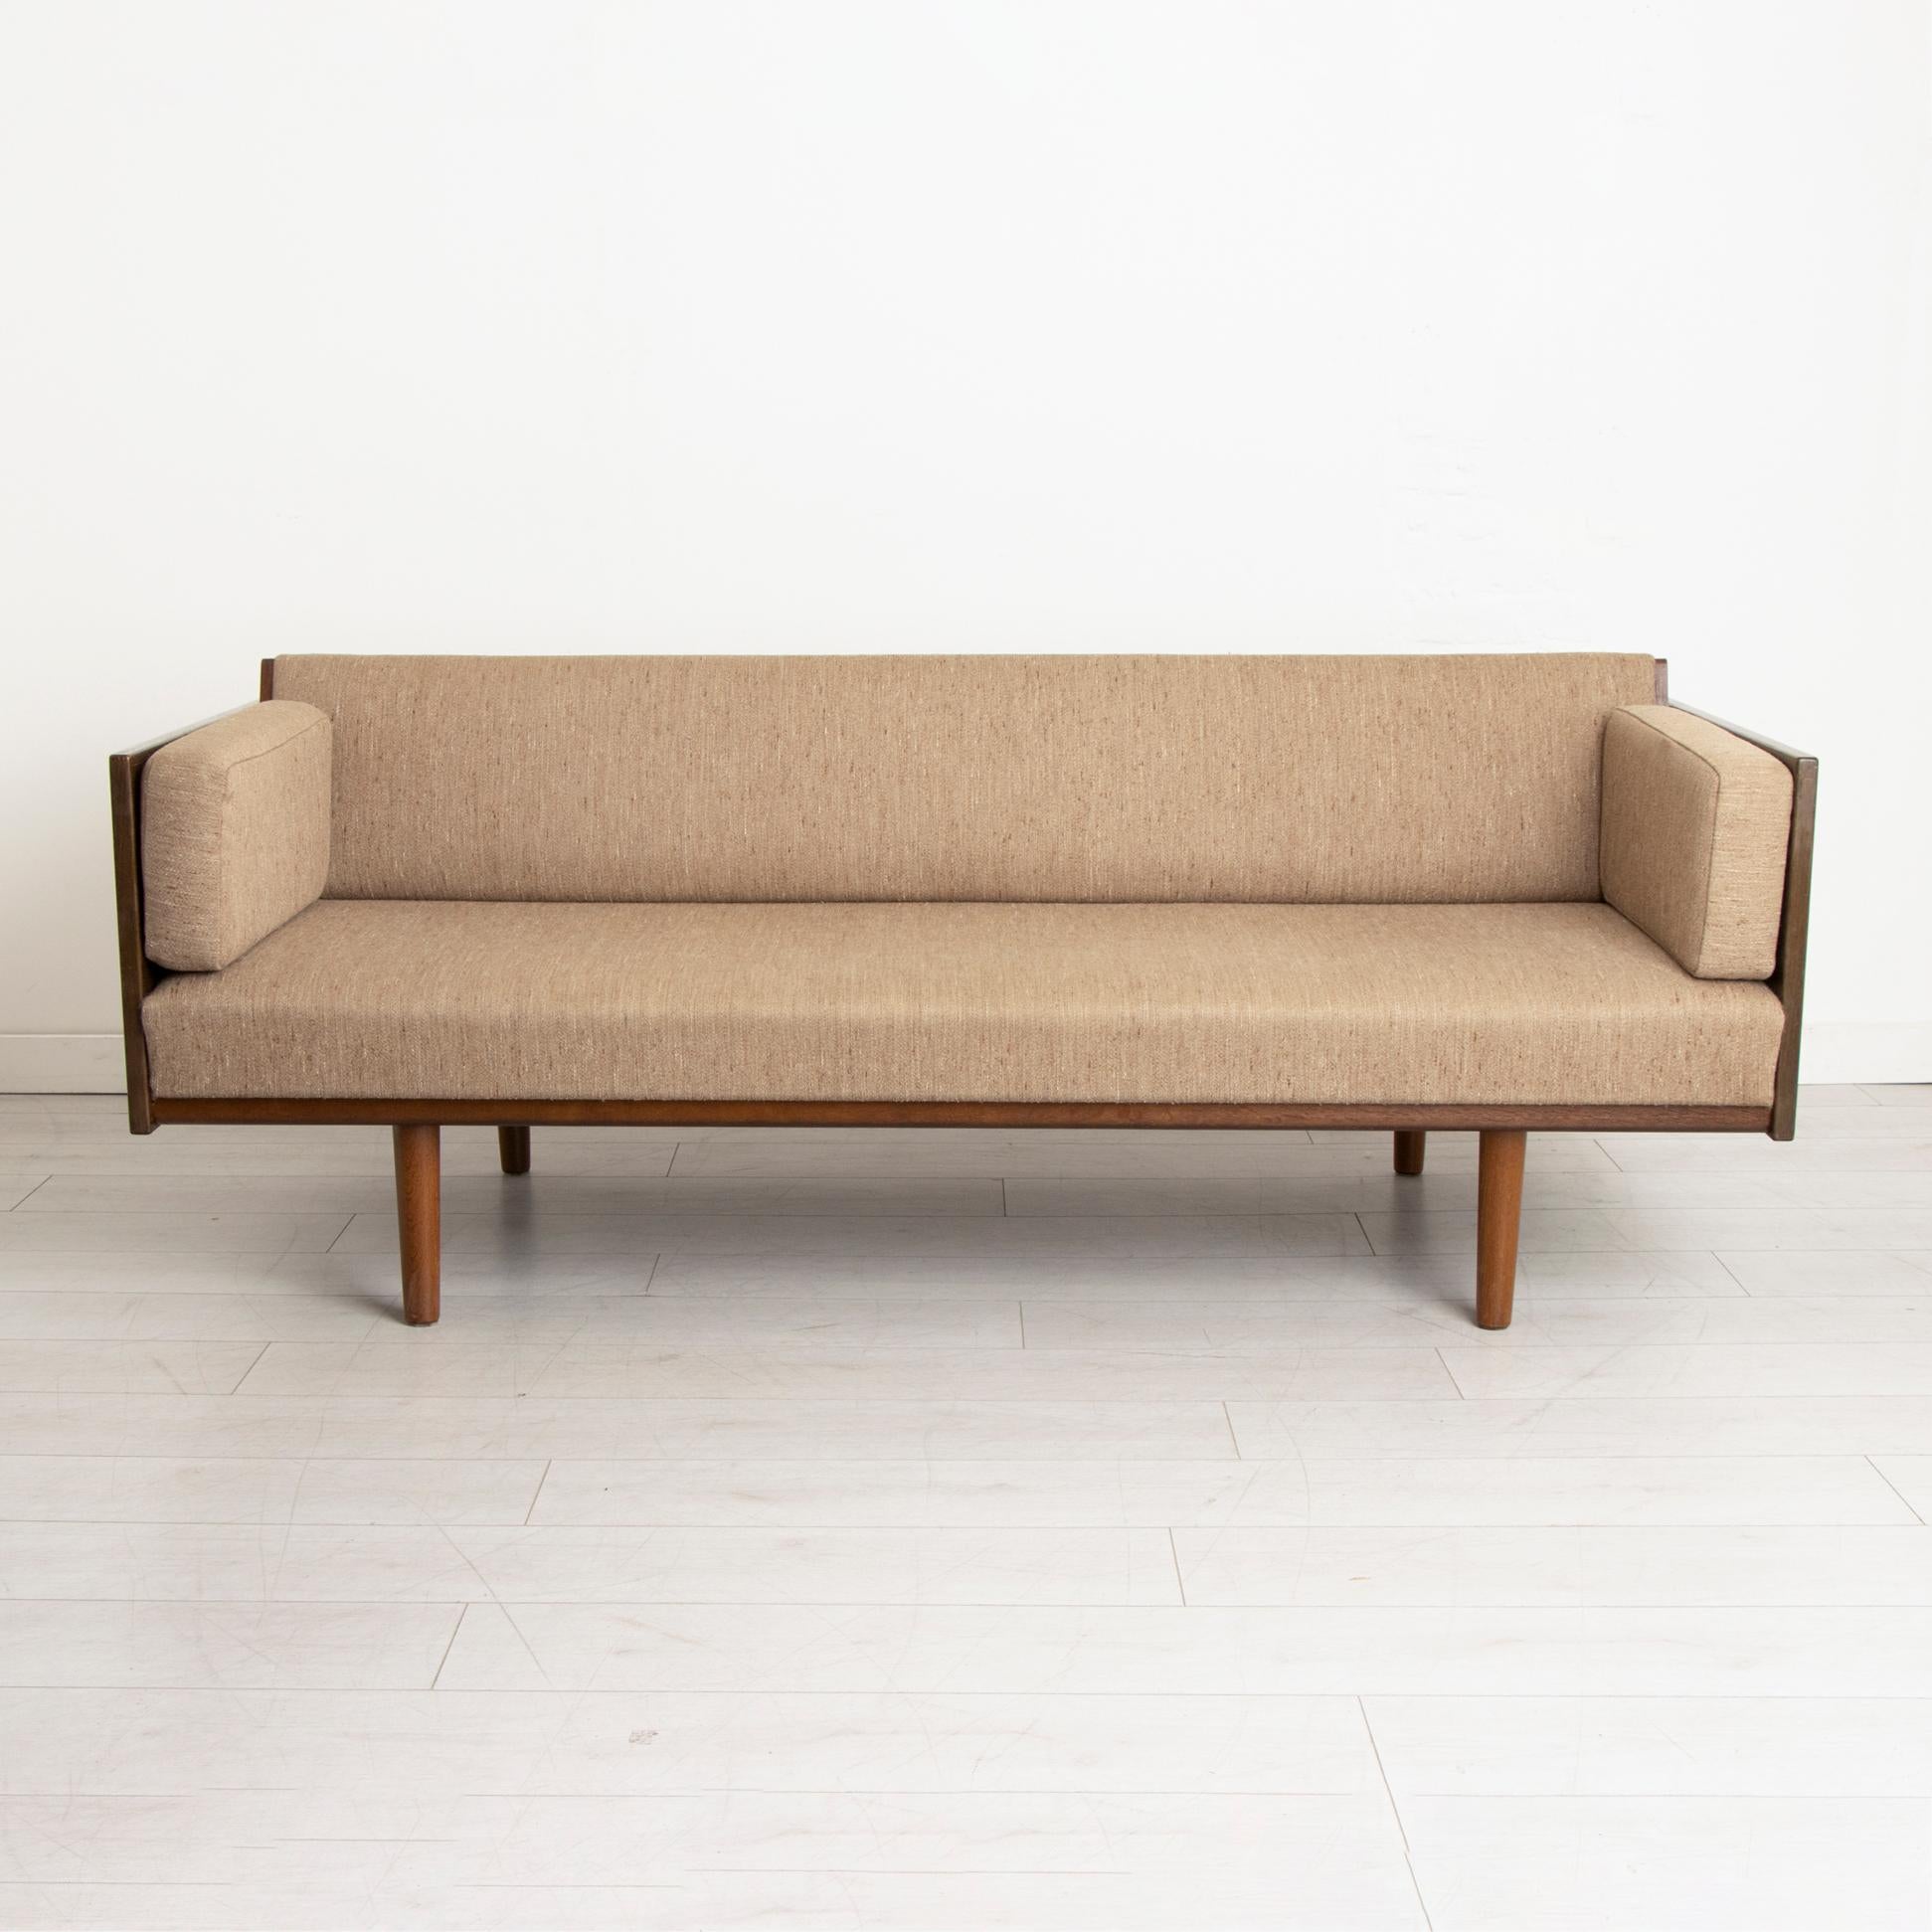 A midcentury Danish sofa bed designed by Hans J Wegner for Getama model GE6 made in oak and teak. Very rare early model. Stain to interior sheet.